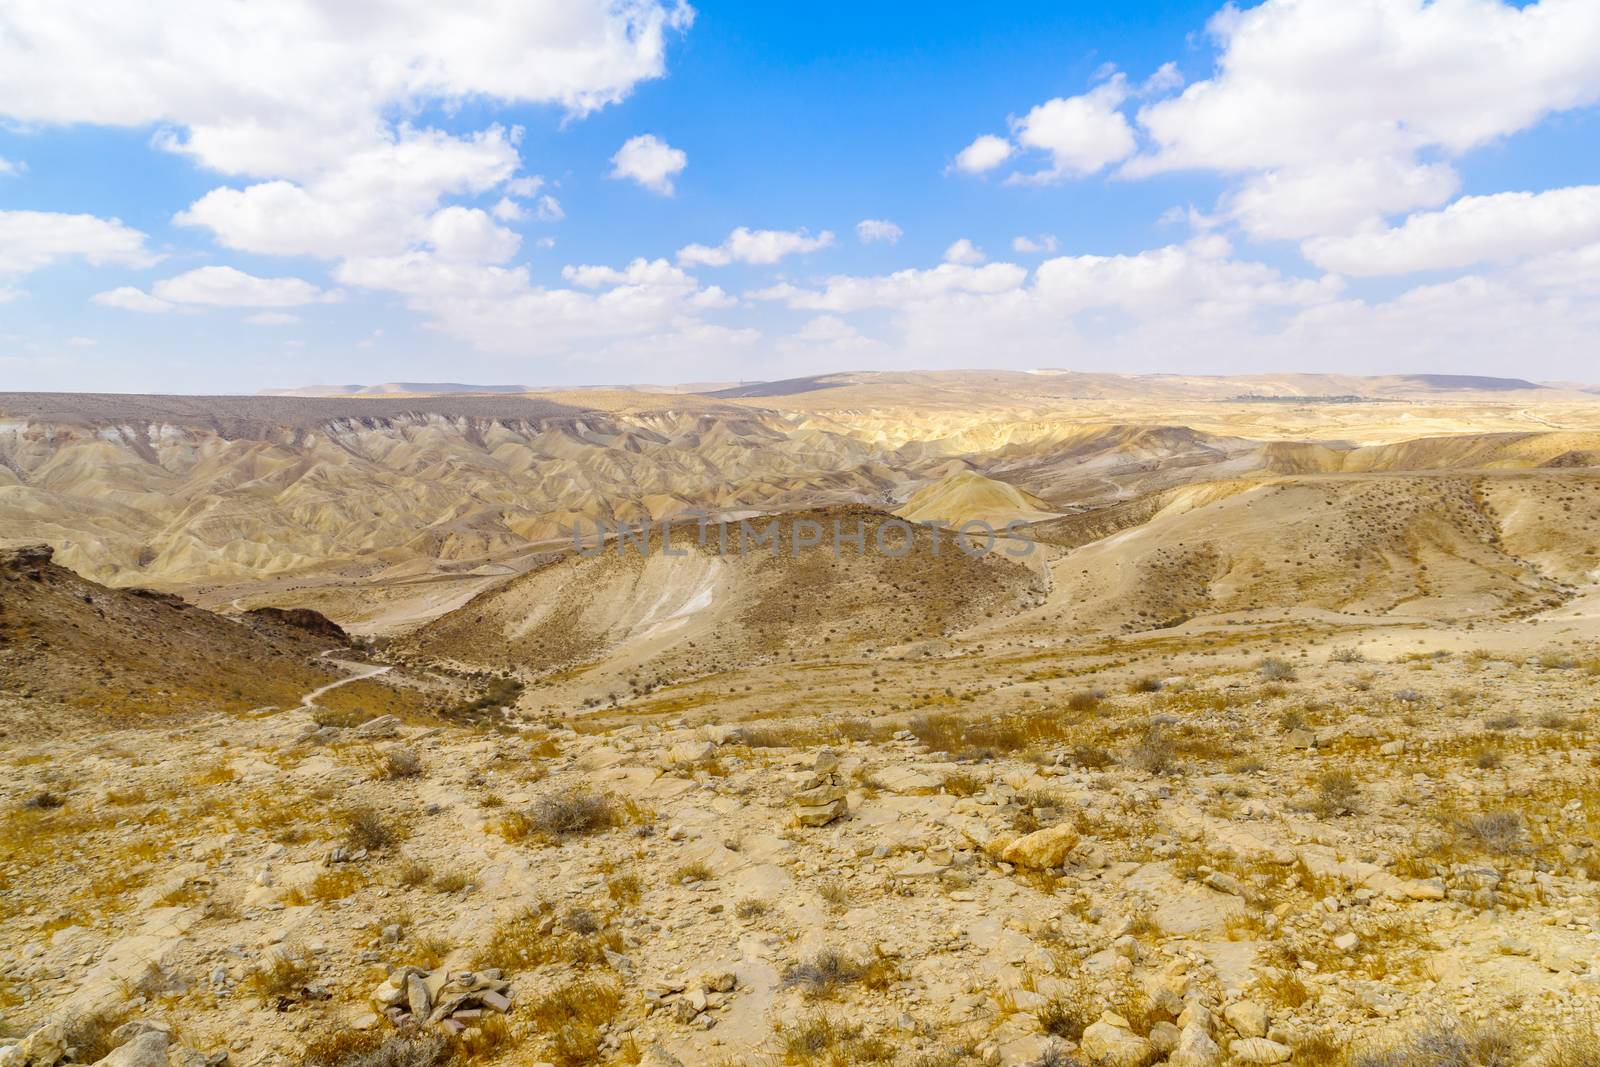 View of the Zin Valley in the Negev Desert. Southern Israel